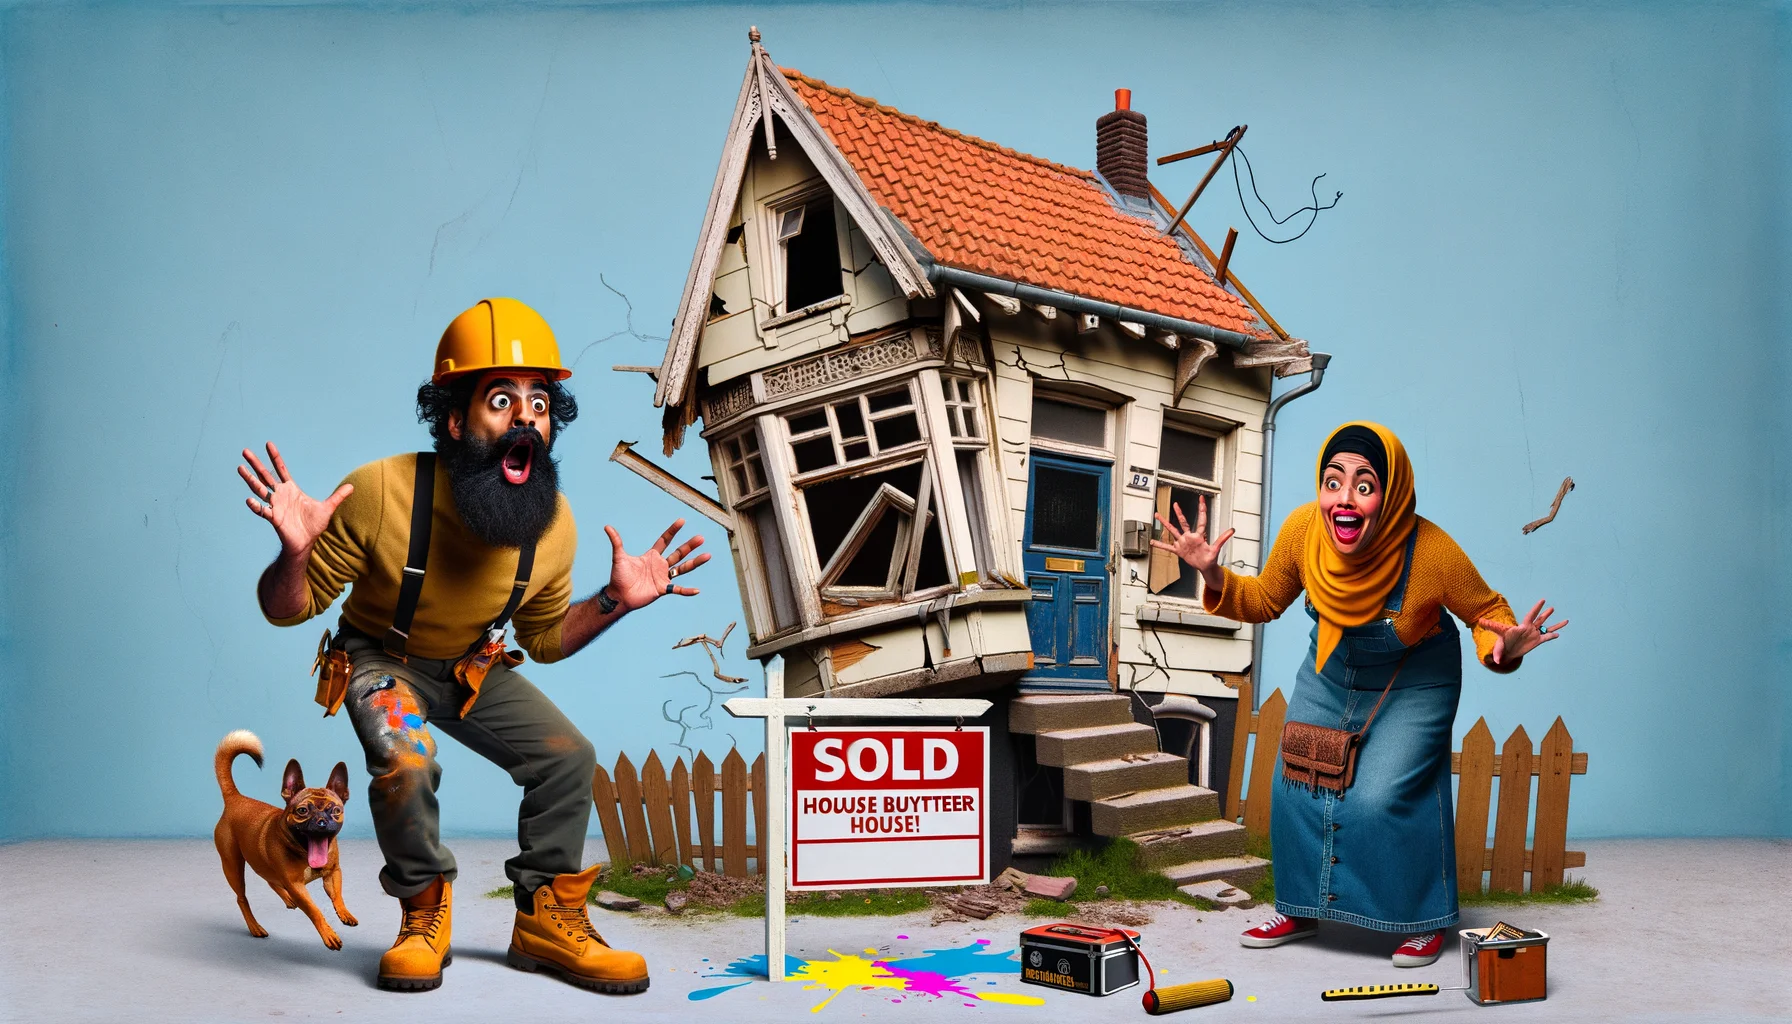 Picture a humorous scene of house buying adventures! A Middle-Eastern man and a Hispanic woman, both in hard hats and construction gear, stand in front of an eccentrically dilapidated house, their wide eyes revealing a mixture of shock and amusement. The house leans to one side, with a door hanging off its hinges and a window precariously cracked. However, a 'Sold' real estate sign proudly sits in the untidy front yard. An excited dog runs around, knocking over a can of paint, splashing bright color onto the worn-out fence. Laughter is effectively captured in this joyful yet satirical vision of purchasing a fixer-upper house.